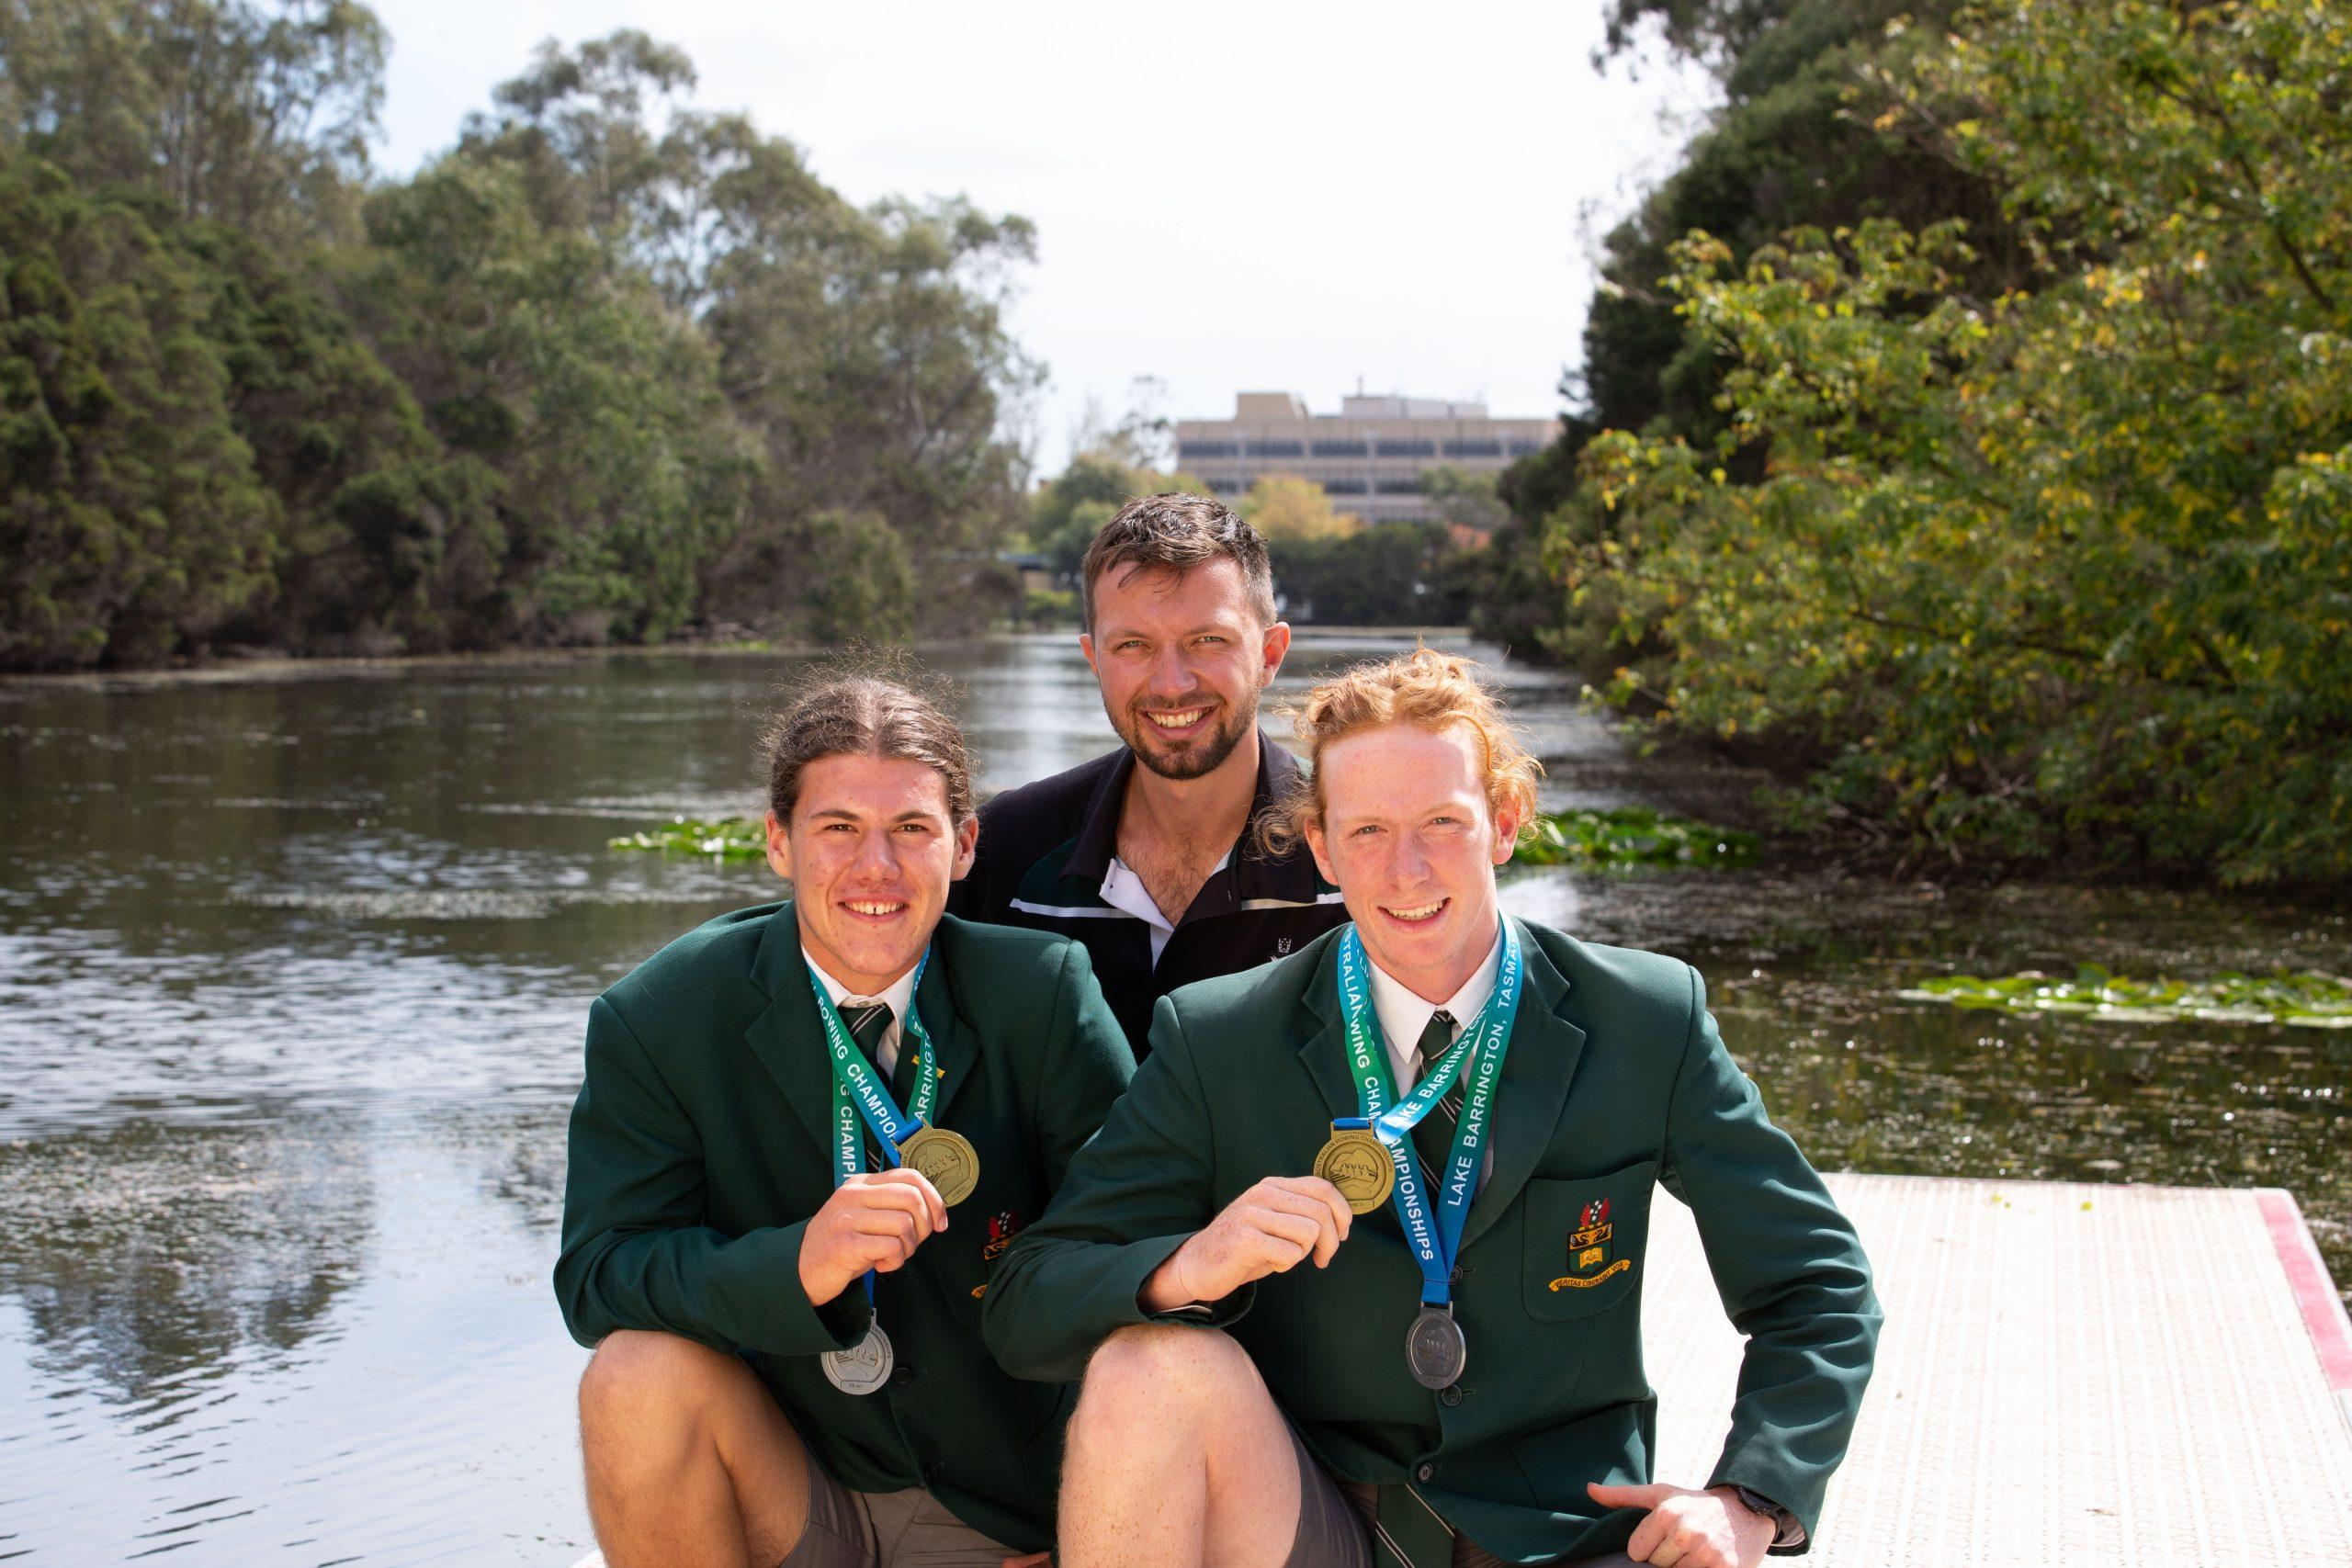 Gippsland Grammar Year 12 students Billy Osborne and Lindsay Hamilton with Head of Rowing Nick Bartlett have been selected in Rowing Australia’s team to represent Australia at the World Championships in Italy in July.